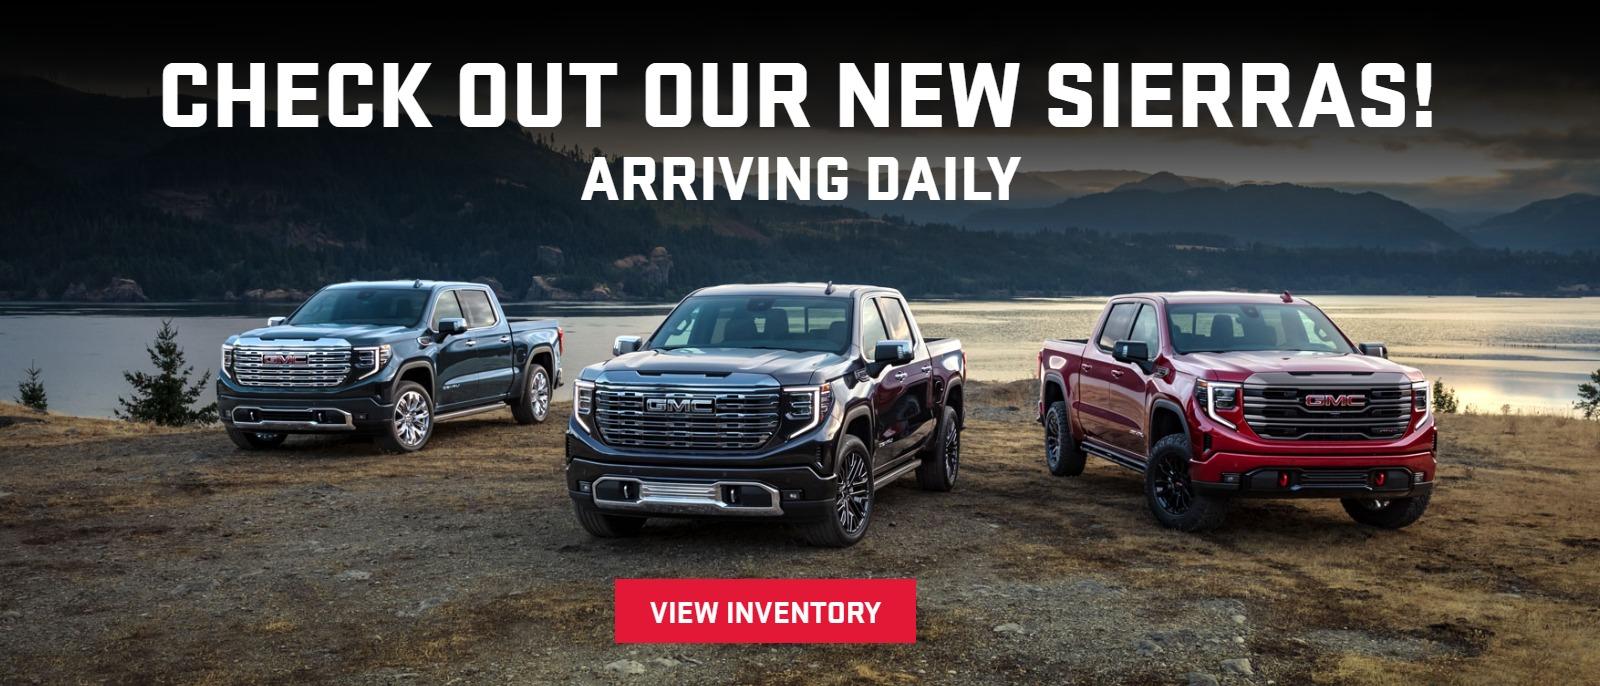 Check Our Our New Sierras!
Call to Schedule a Test Drive Today!